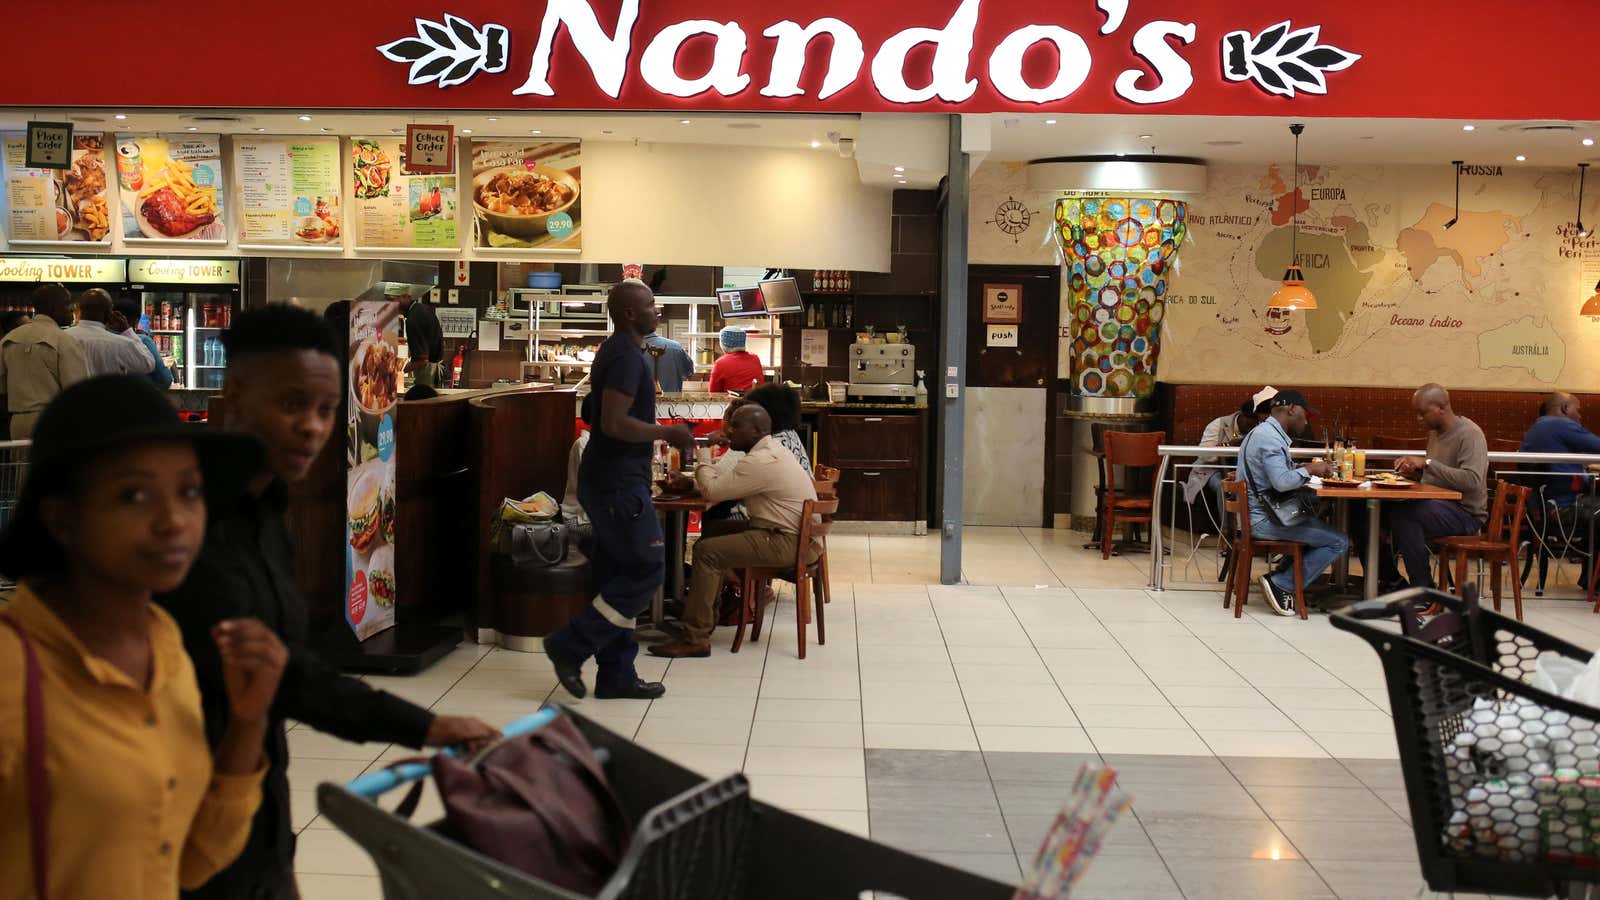 Fast-food chain Nando’s has made a name for itself with its spicy commercials.